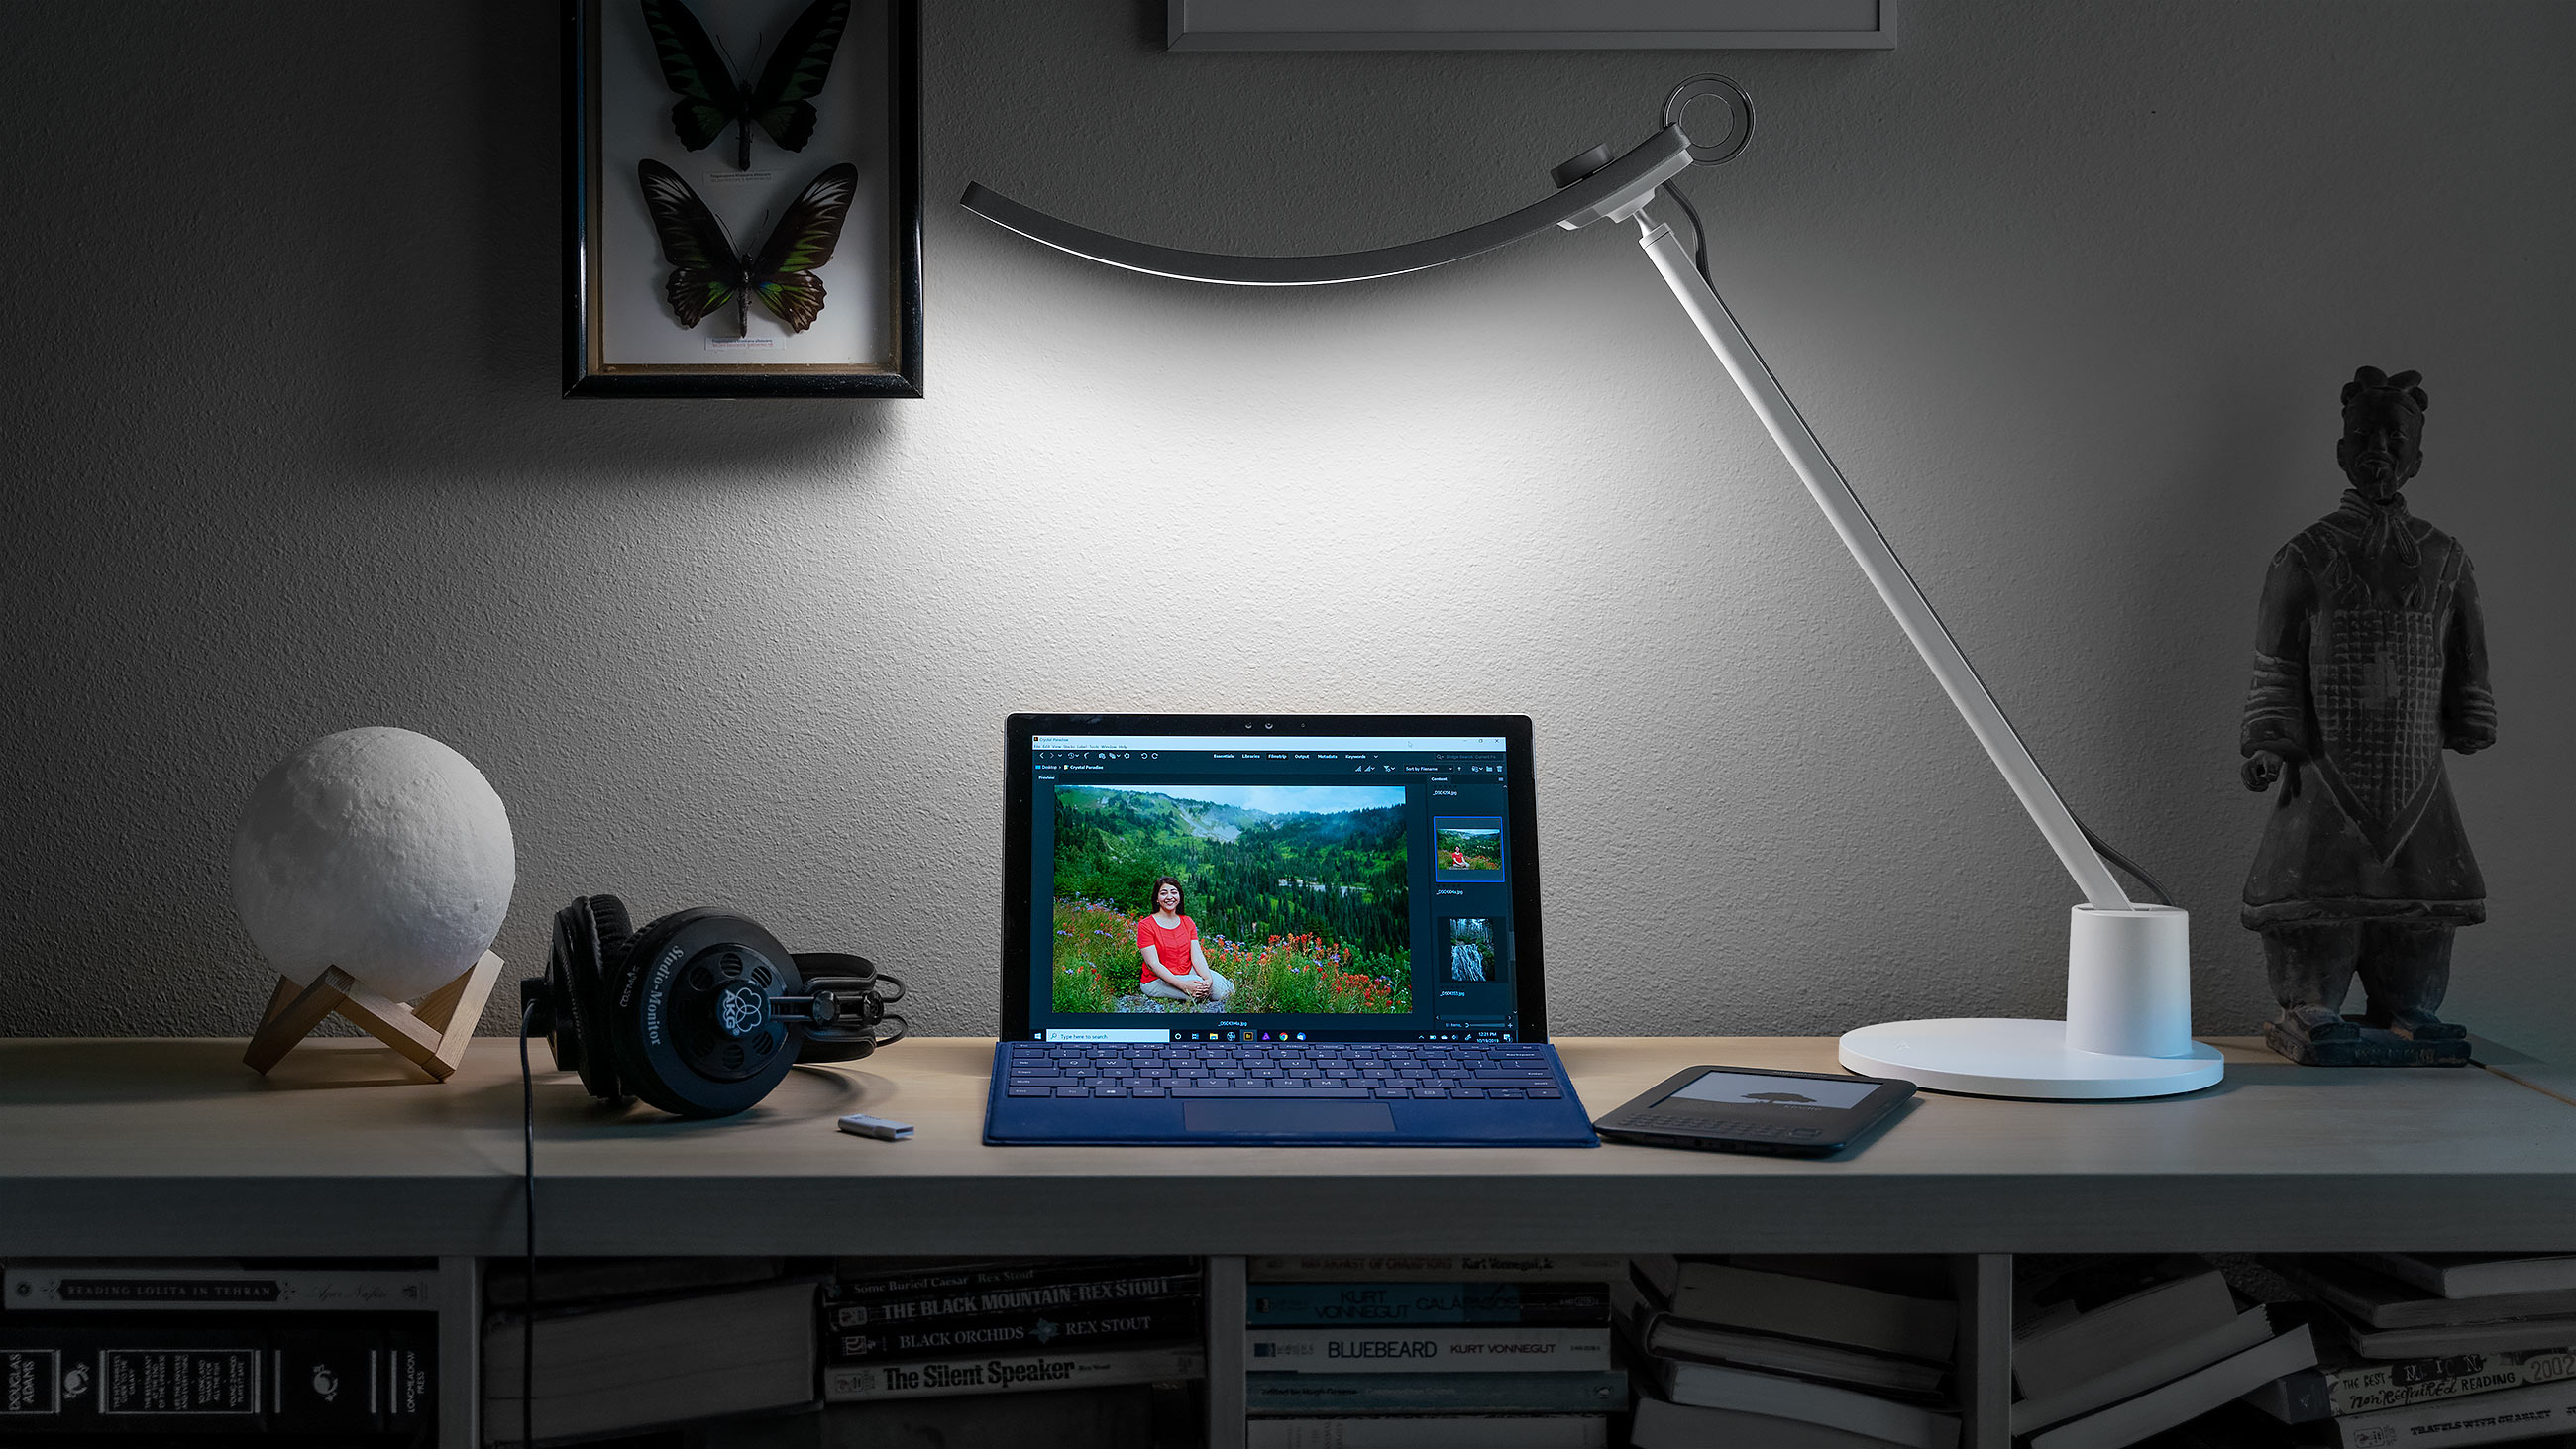 Featured Image of BenQ Genie Desk Lamp in Use